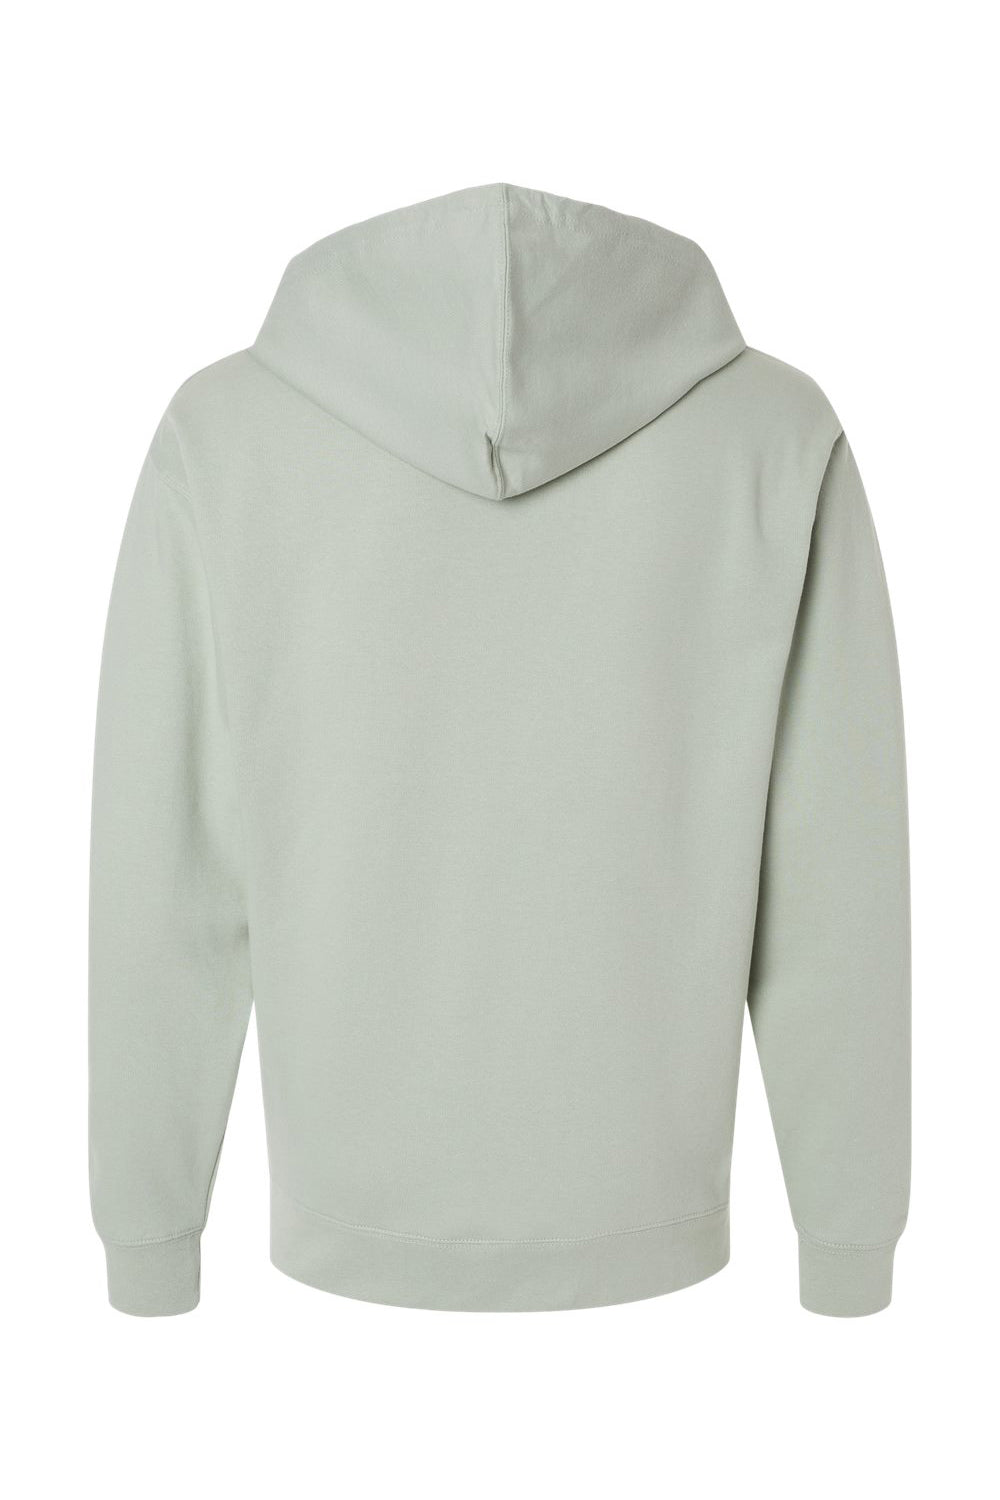 Independent Trading Co. SS4500 Mens Hooded Sweatshirt Hoodie Dusty Sage Green Flat Back